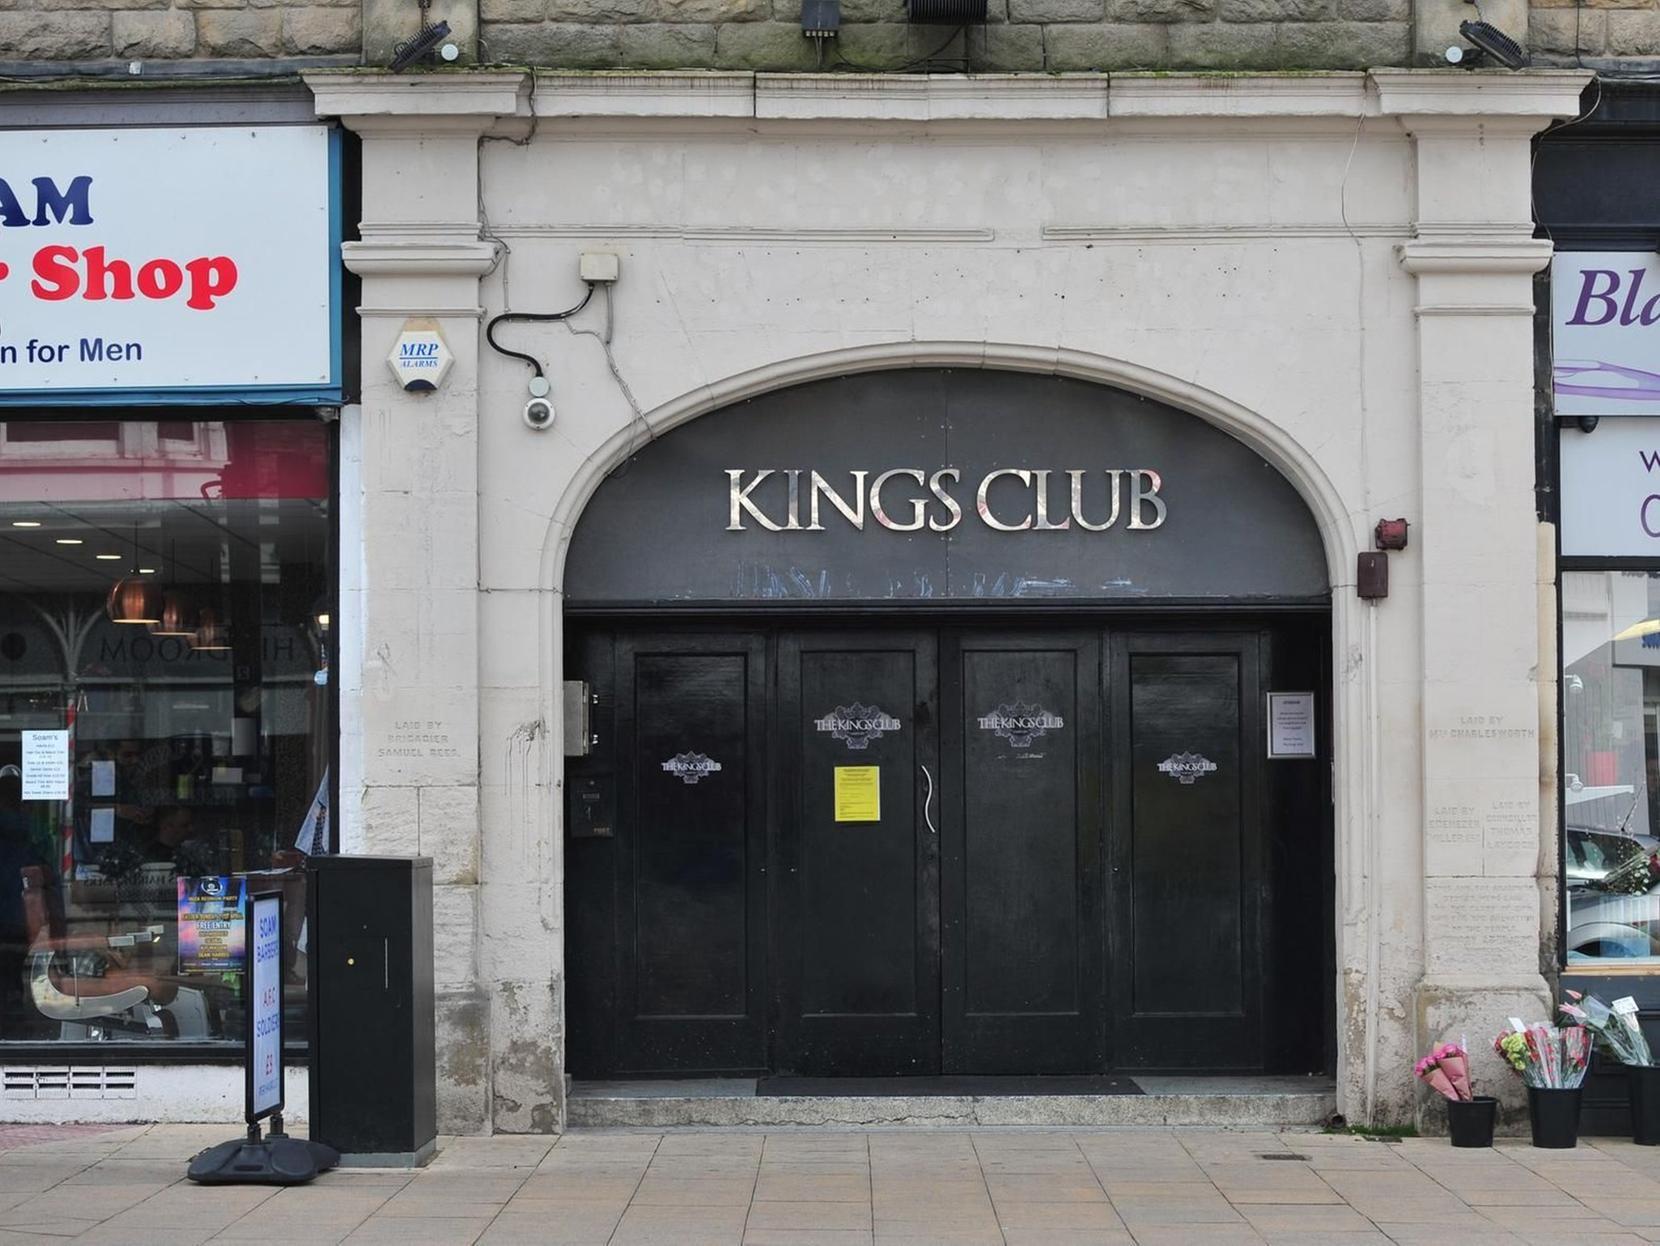 Harrogate strip club in legal standoff with council over sexual entertainment licence Sex Image Hq